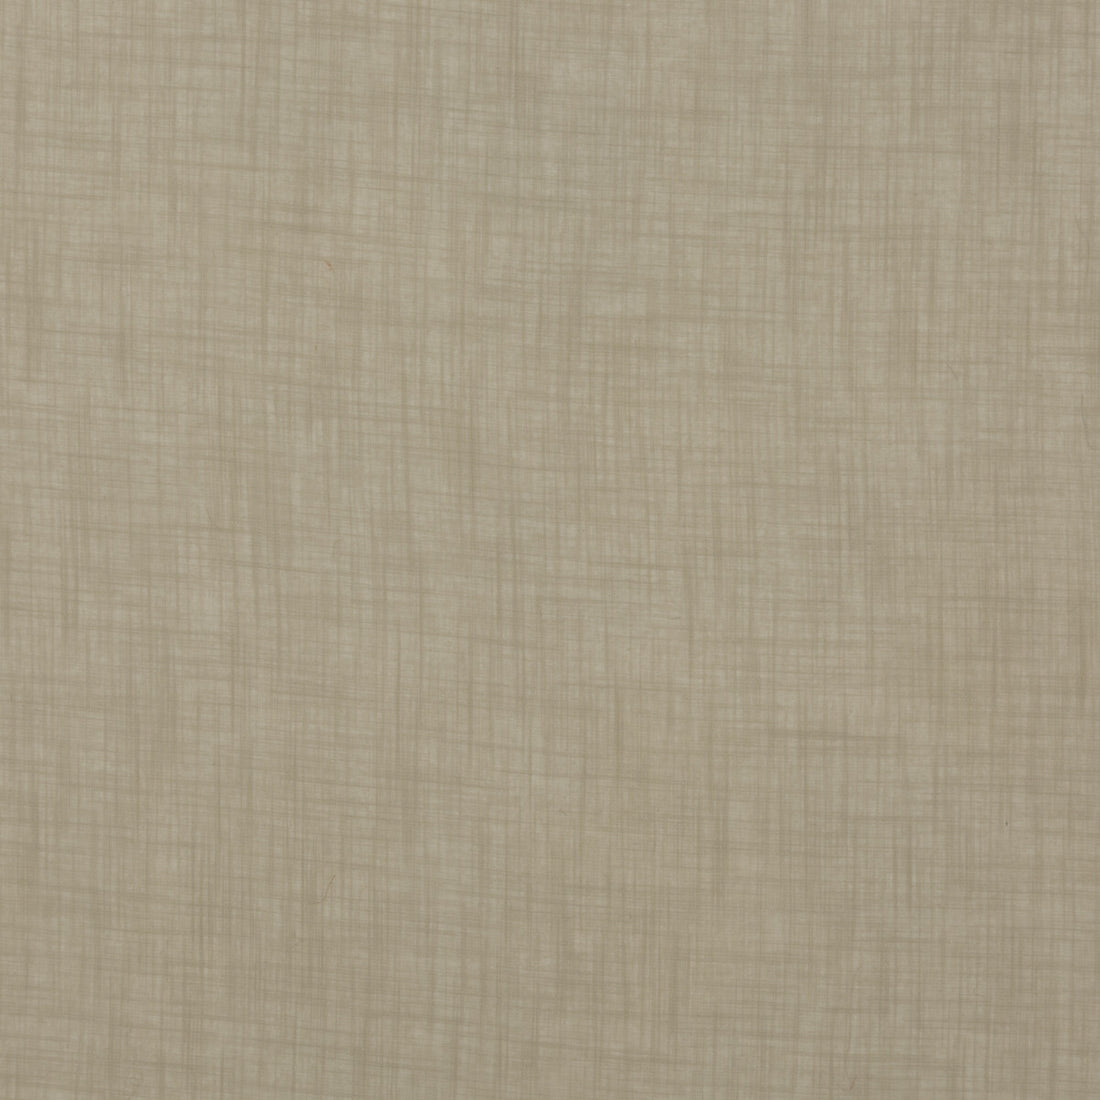 Kelso fabric in cashew color - pattern PV1005.260.0 - by Baker Lifestyle in the Notebooks collection